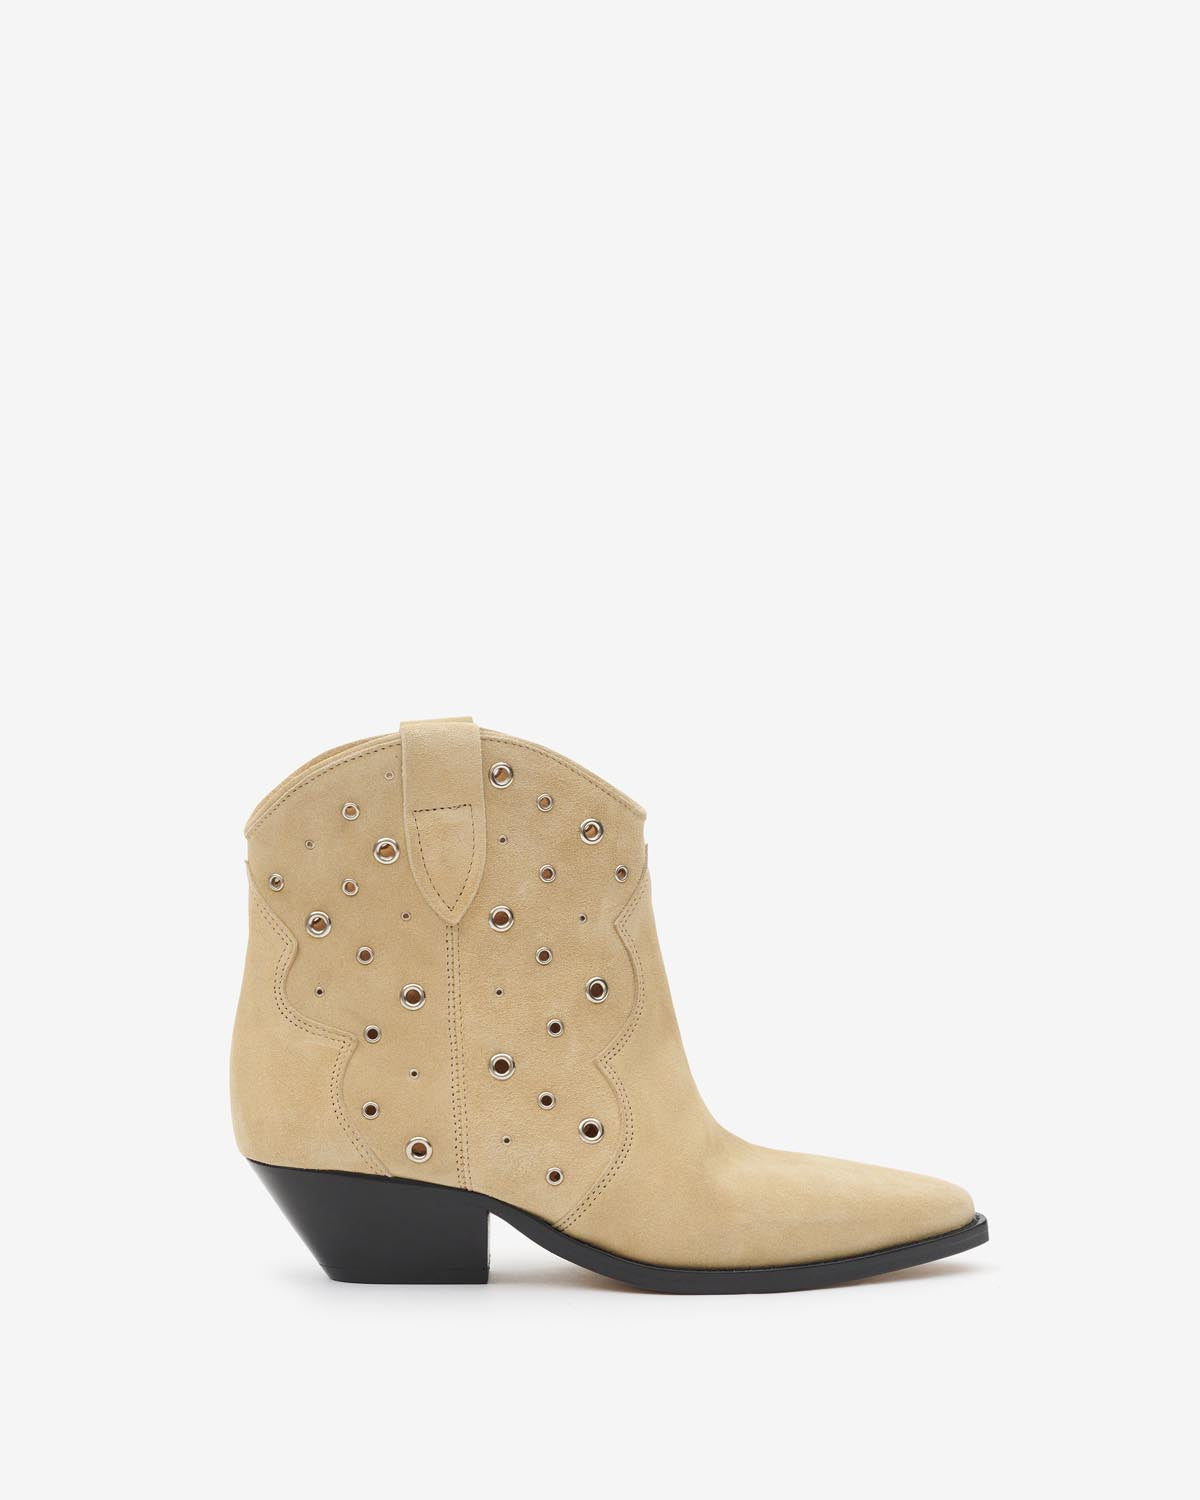 Boots dewina Woman Toffee 1